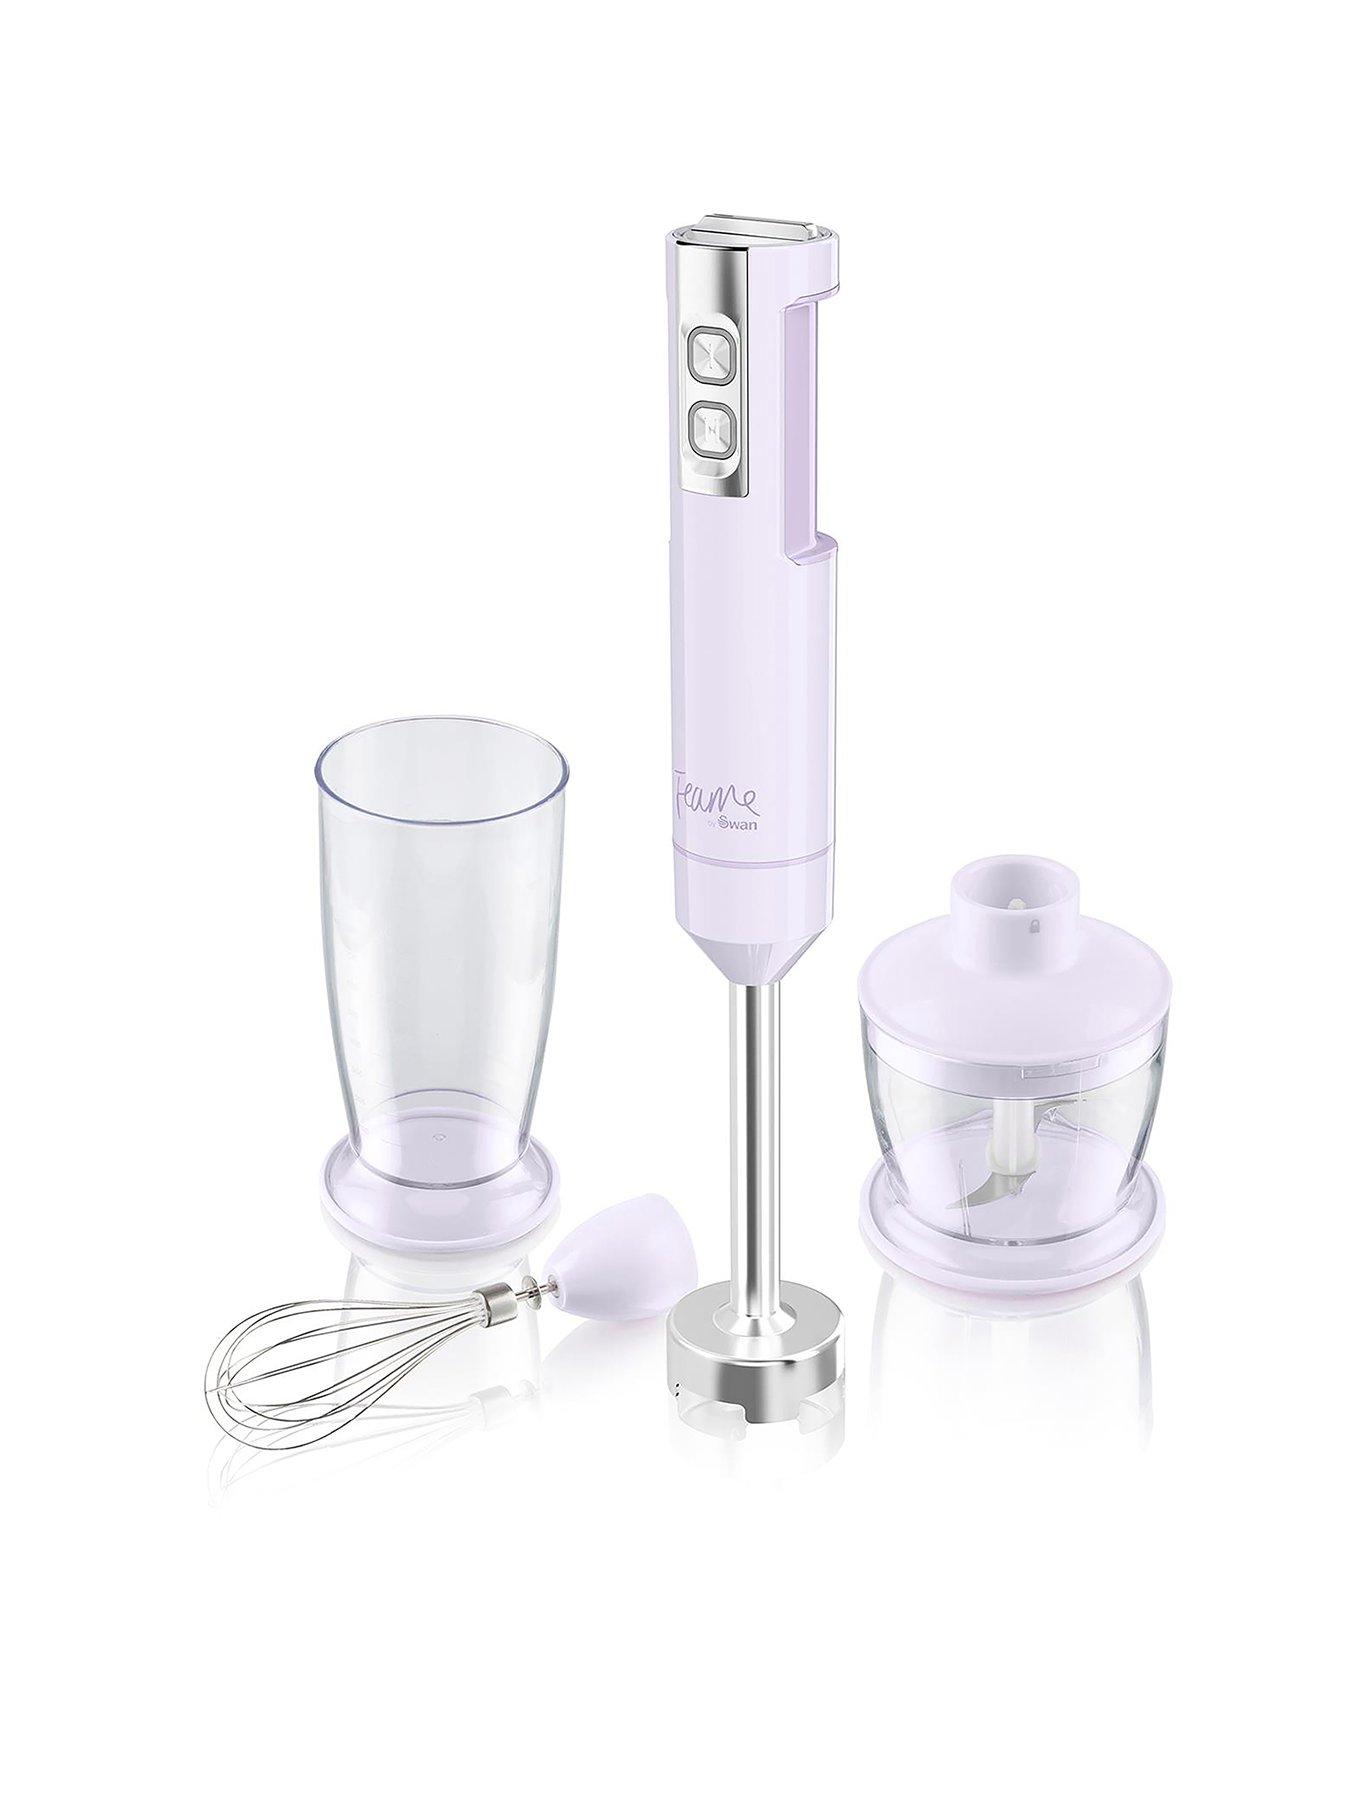 Swan Fearne By Swan Stick Blender 3 In1 Lily Review thumbnail